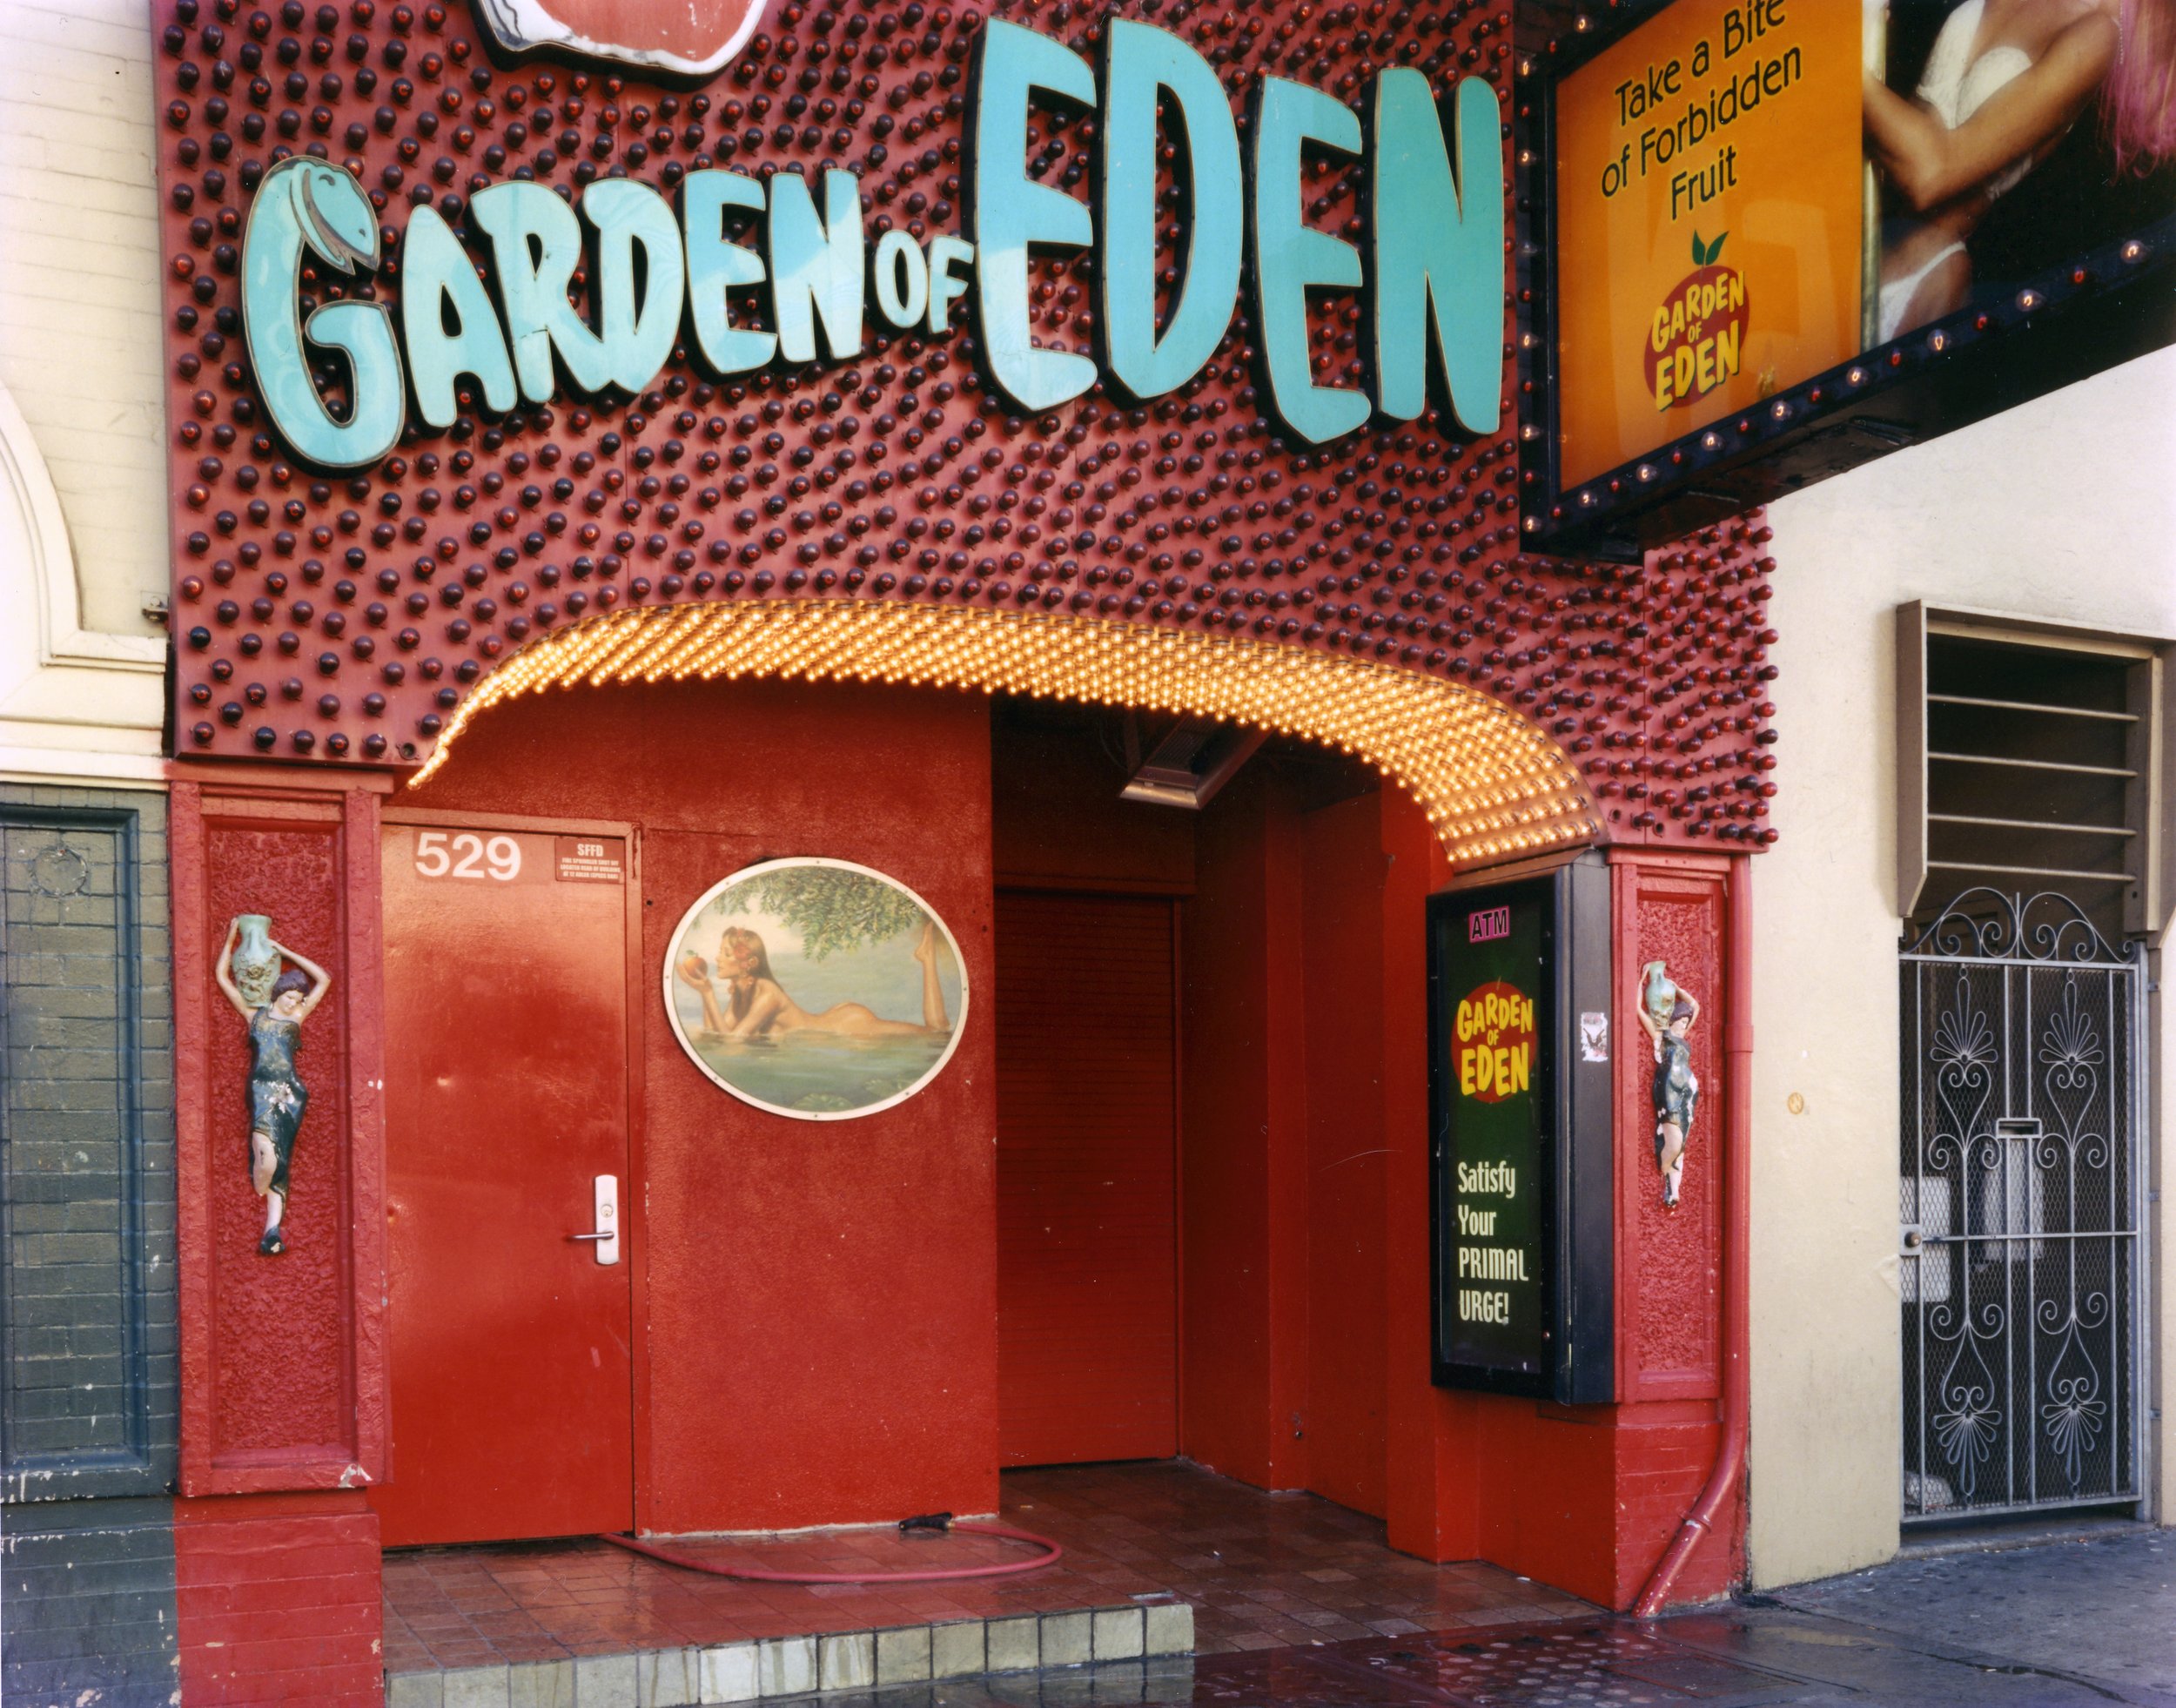  Garden of Eden (formerly Tommy's Place), San Francisco, California, 2007 